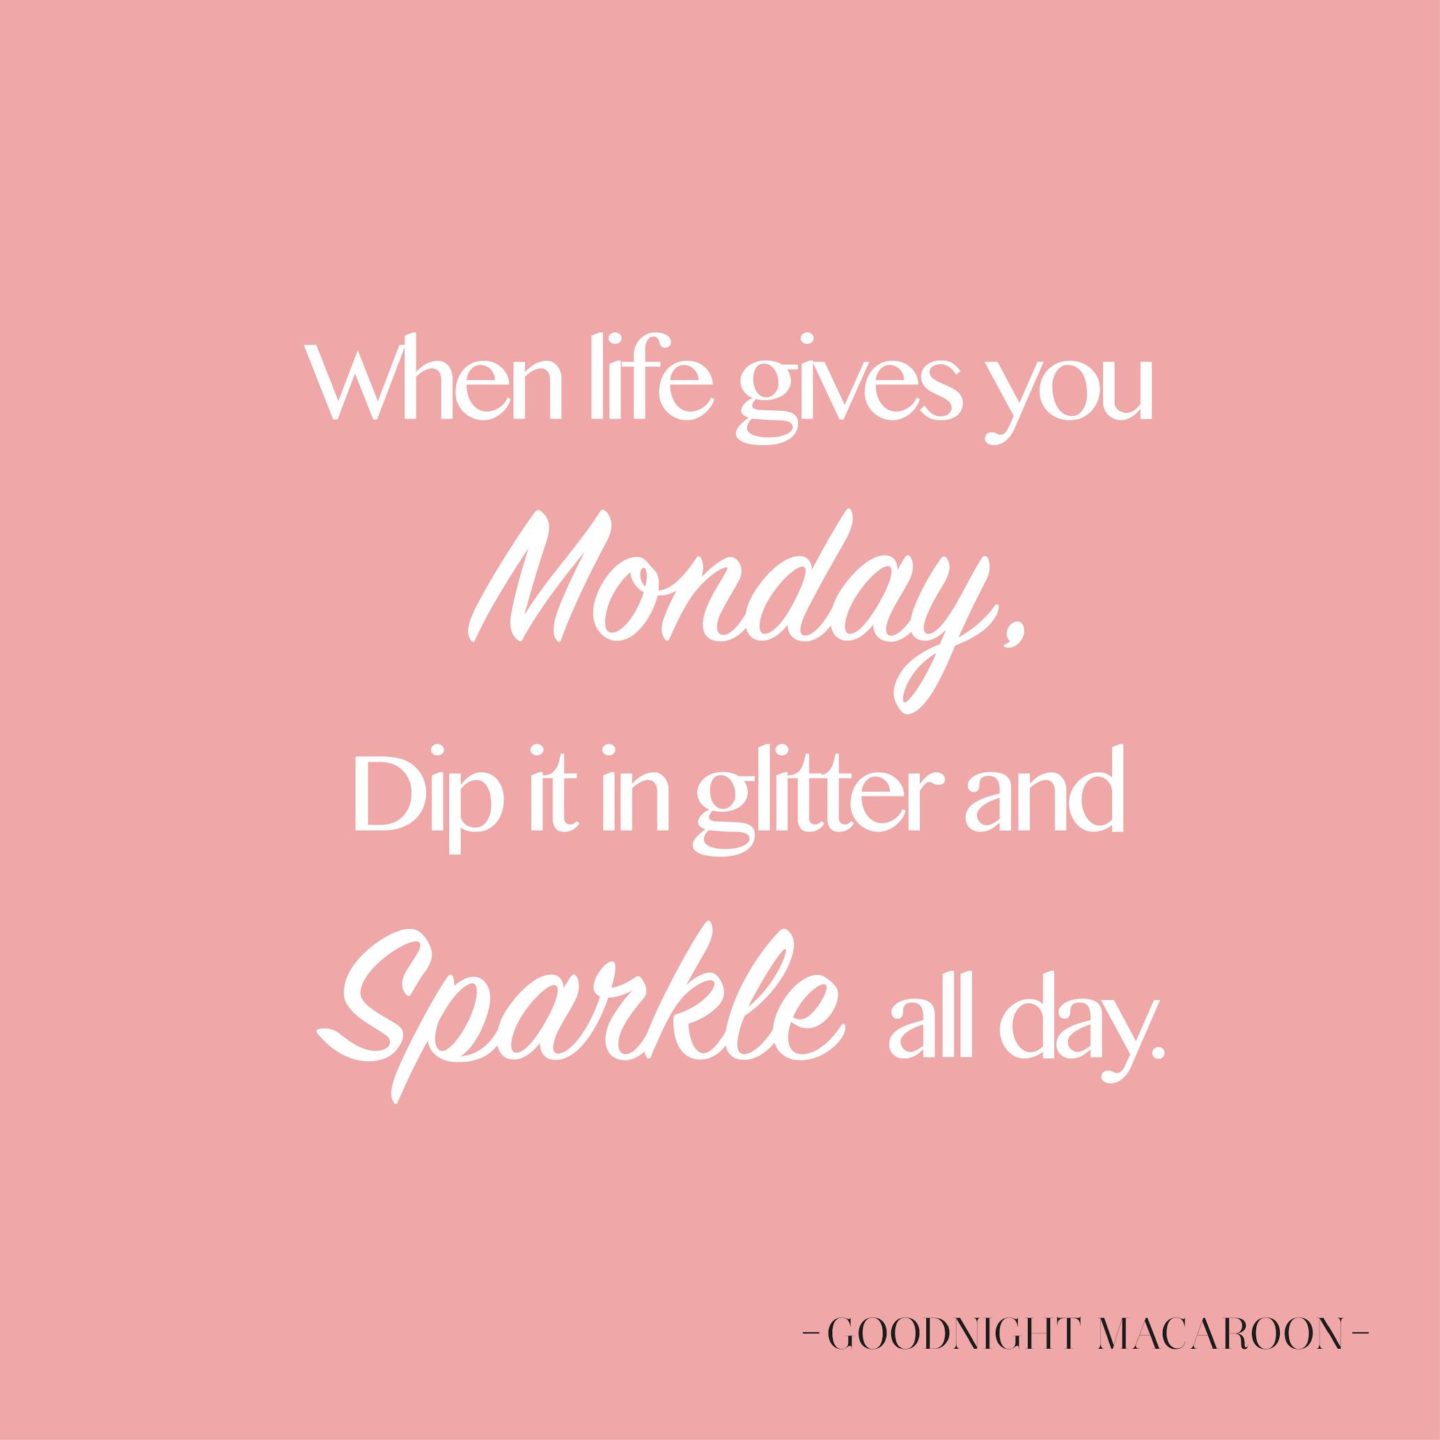 happy monday quotes What to wear monday office outfit idea sayings quotes jpg